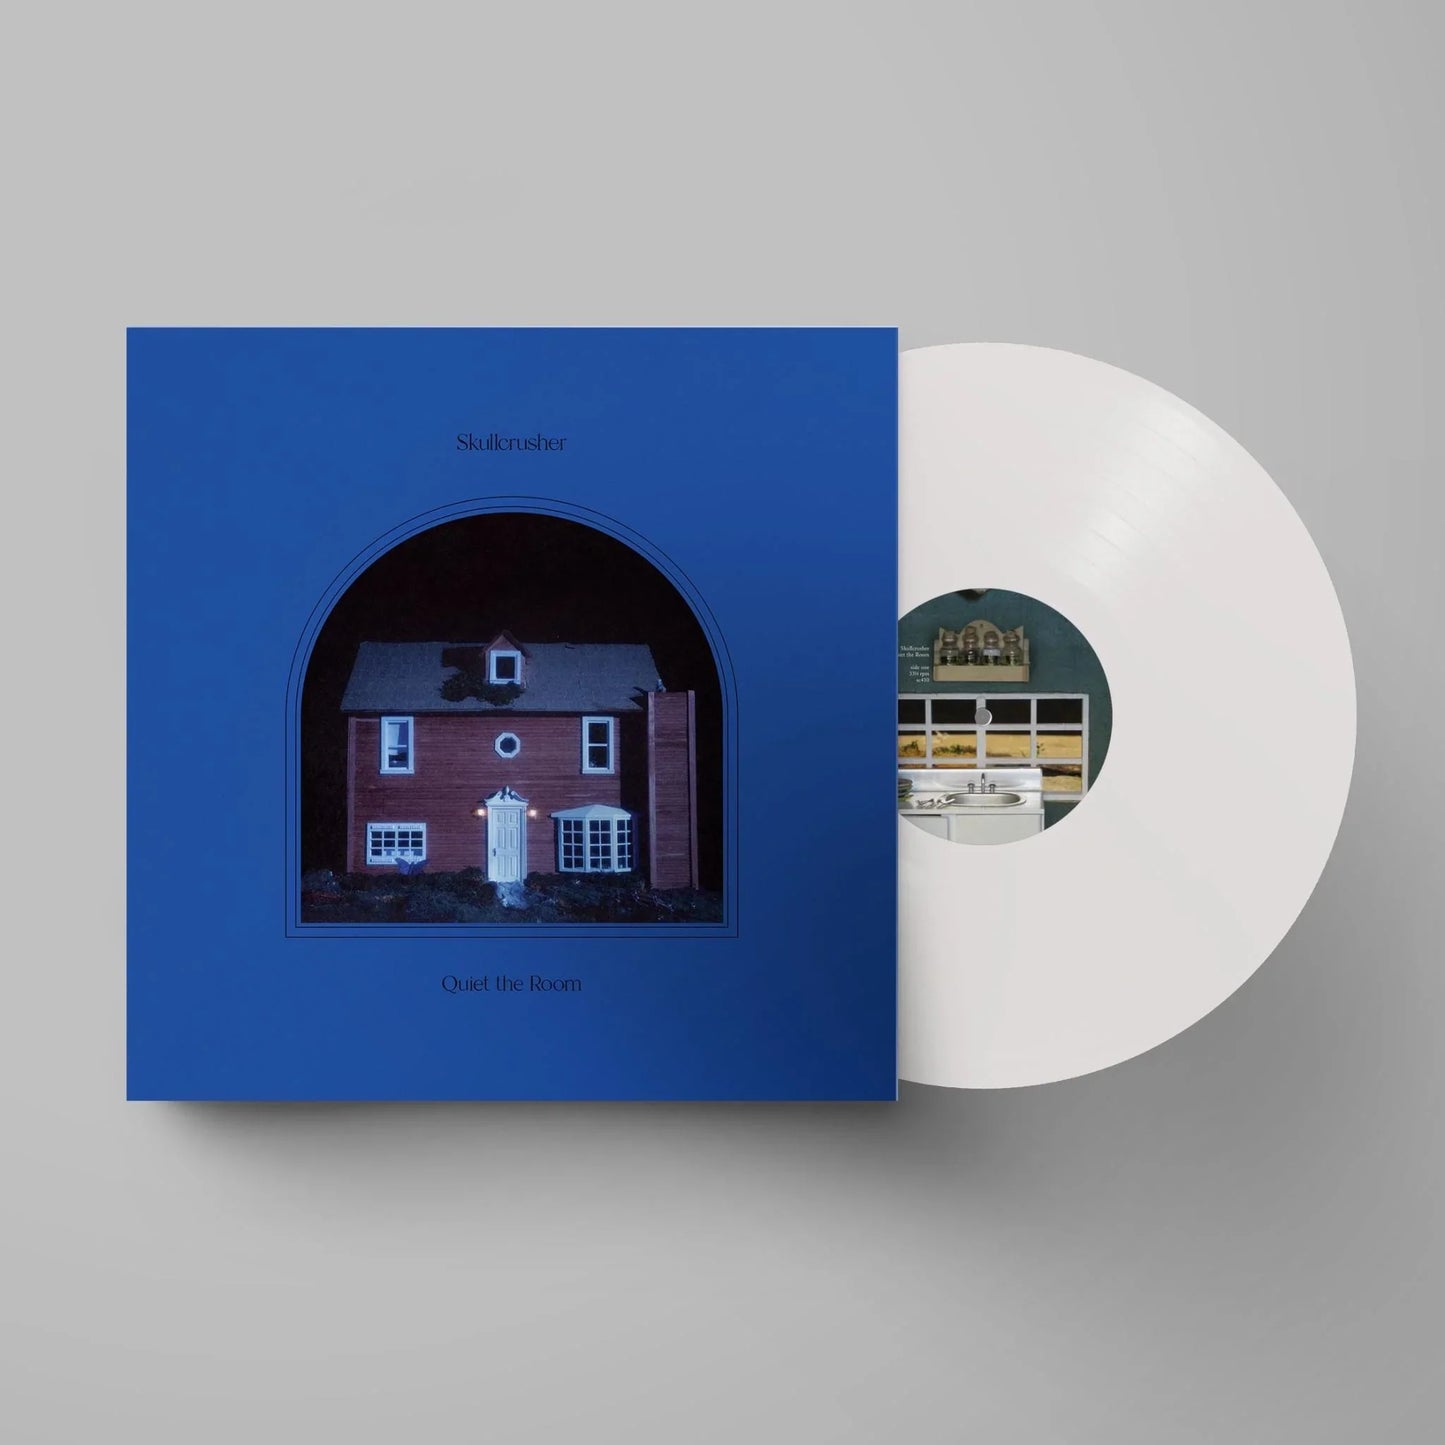 Skullcrusher - Quite The Room (Limited Edition on Cloudy White Vinyl)